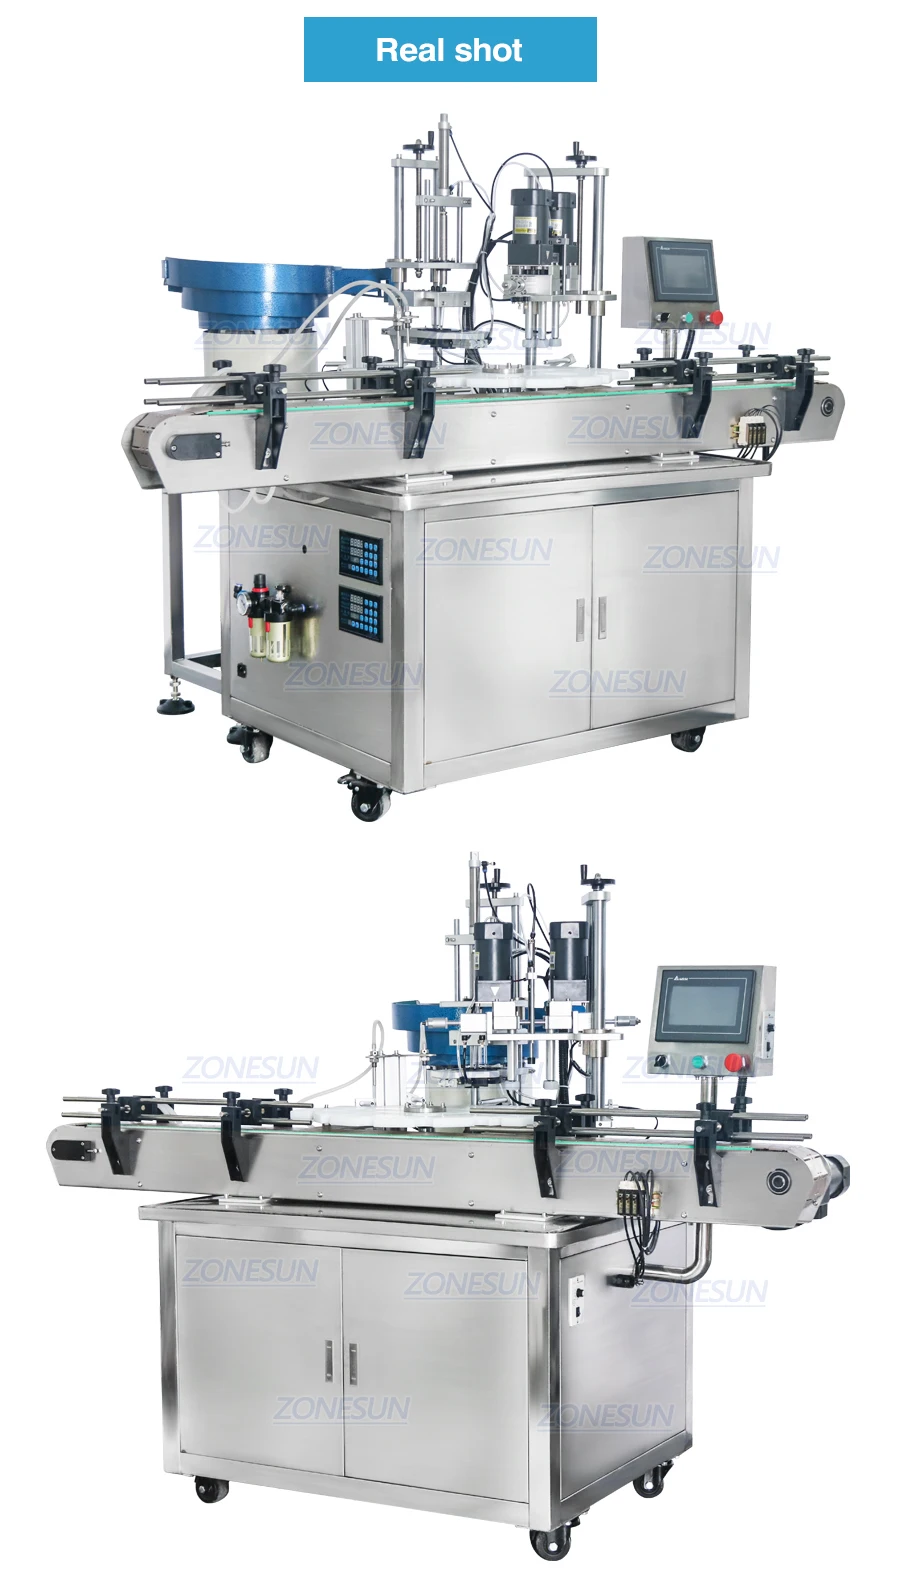 ZONESUN ZS-AFC1 Automatic Double Heads Rotary Filling And Capping Machine cap feeder